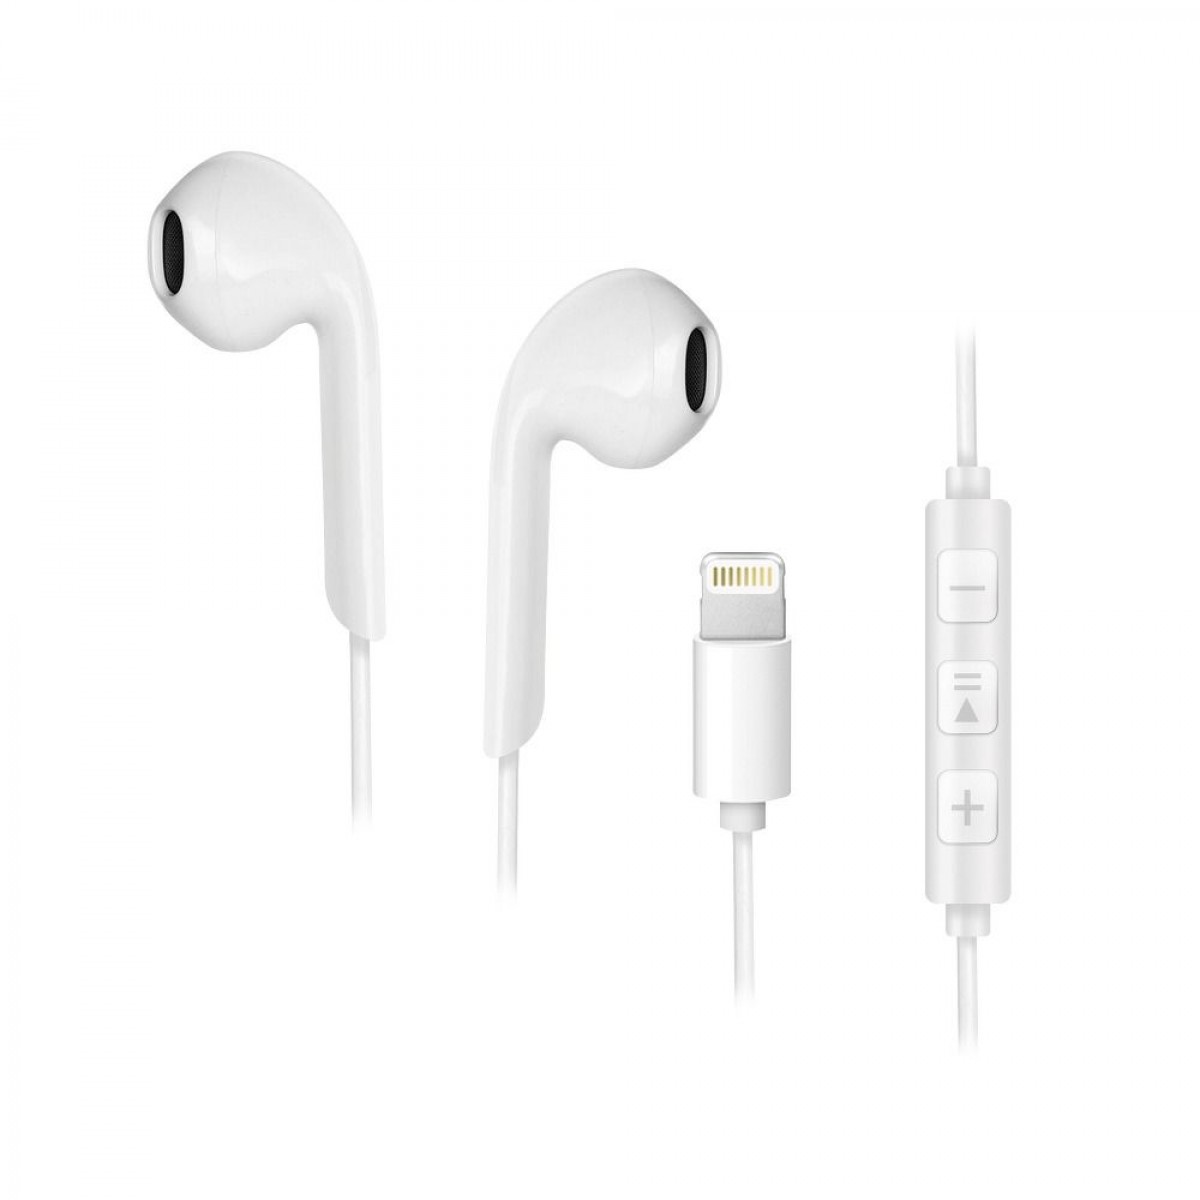 FORCELL EARPHONES STEREO IPHONE LIGHTNING 8-PIN NEW BOX WHITE